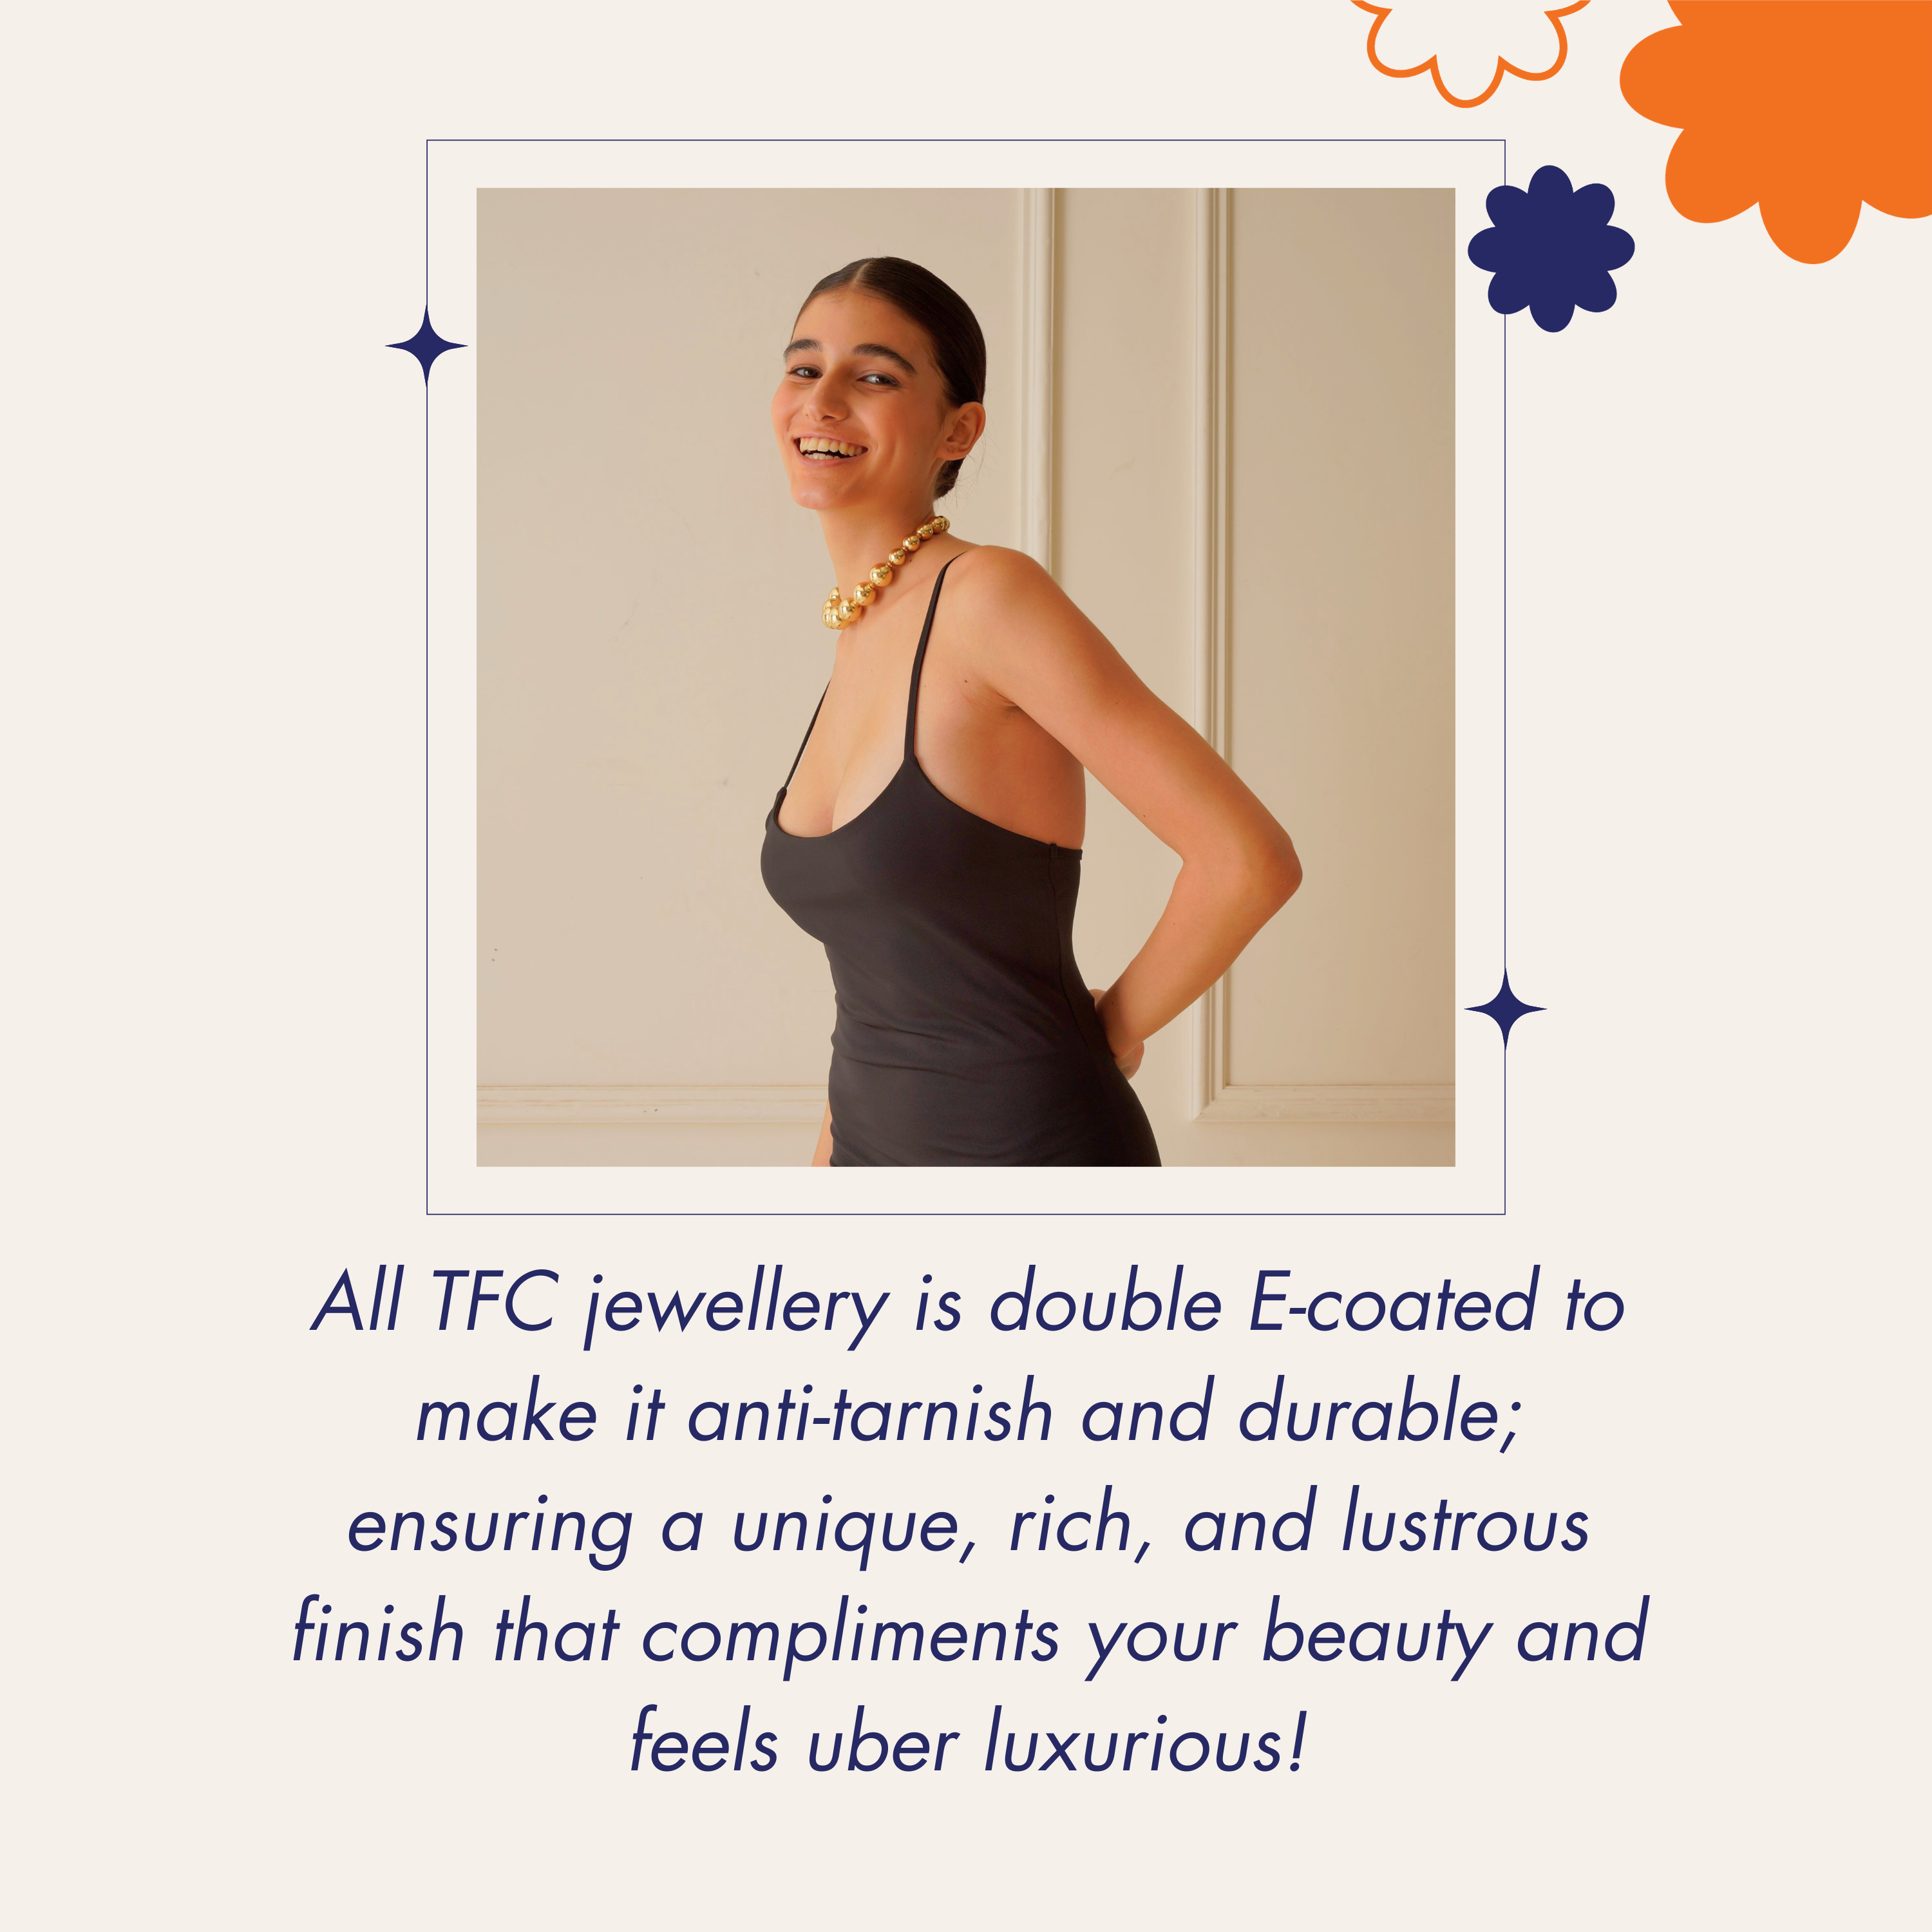 TFC Festive stunner earrings-Discover daily wear gold earrings including stud earrings, hoop earrings, and pearl earrings, perfect as earrings for women and earrings for girls.Find the cheapest fashion jewellery which is anti-tarnish only at The Fun company.